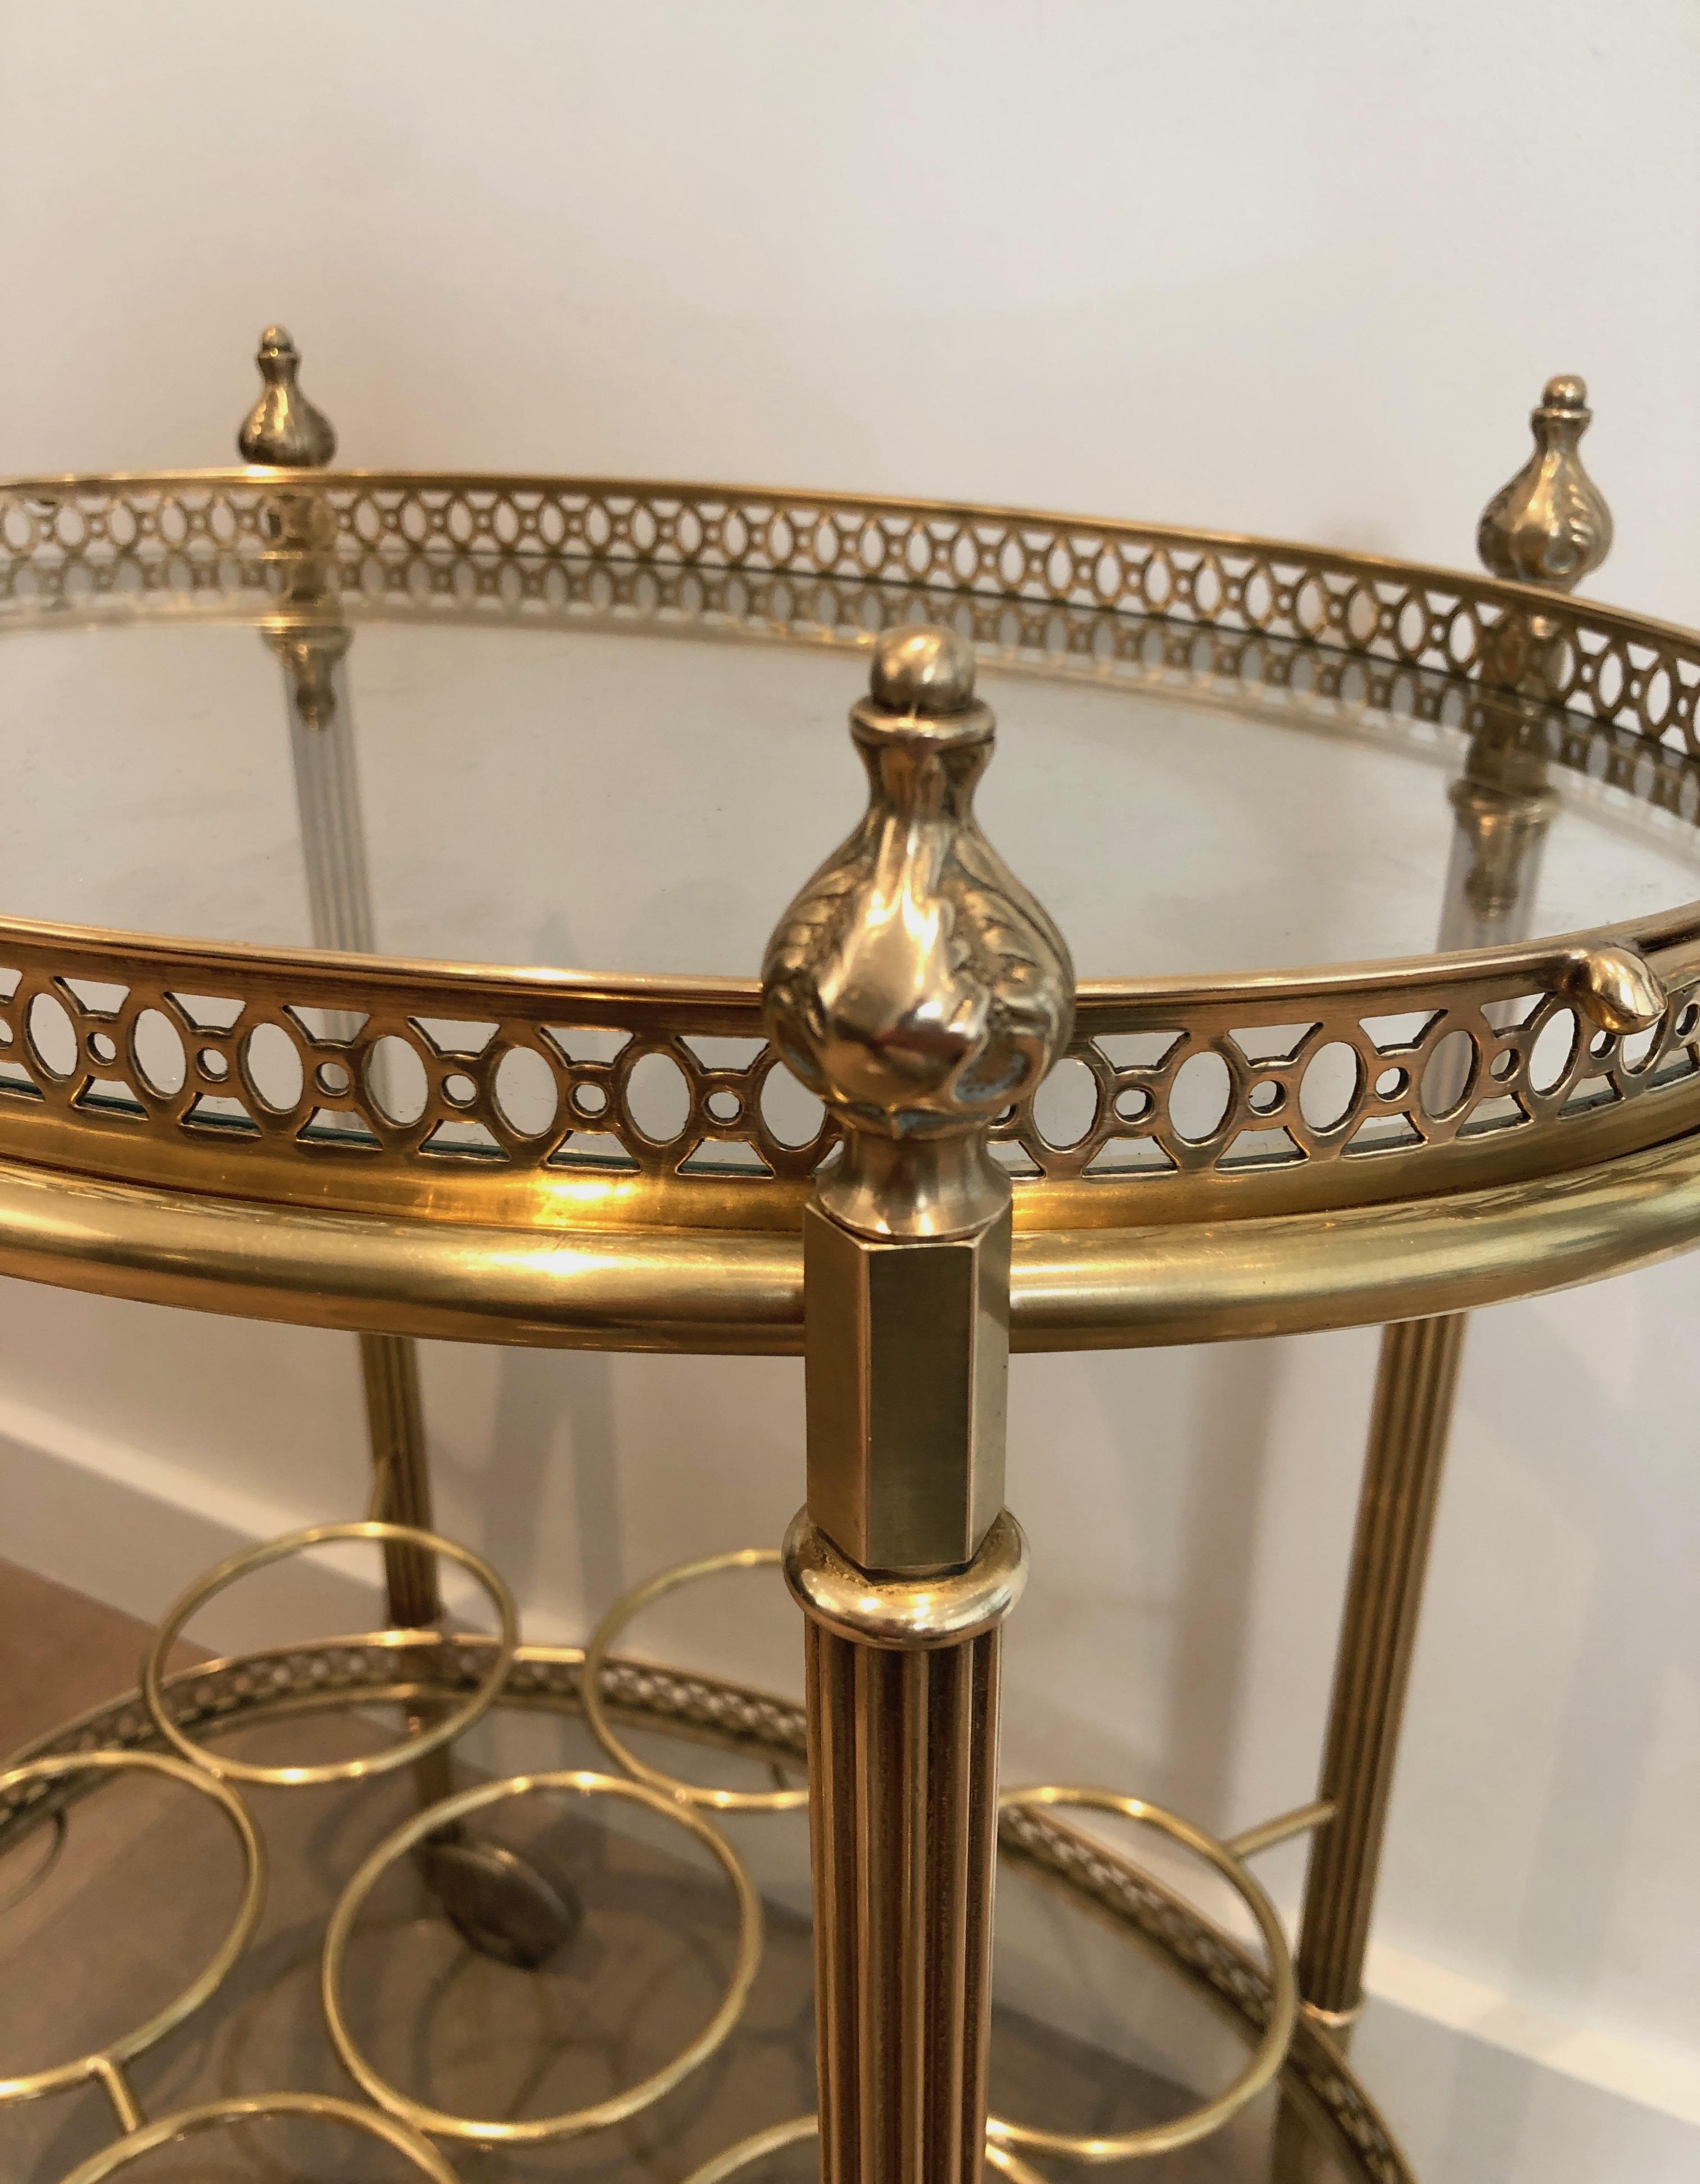 Mid-20th Century Oval Brass Bar Cart with Removable Top Tray and Bottles Holder by Maison Jansen